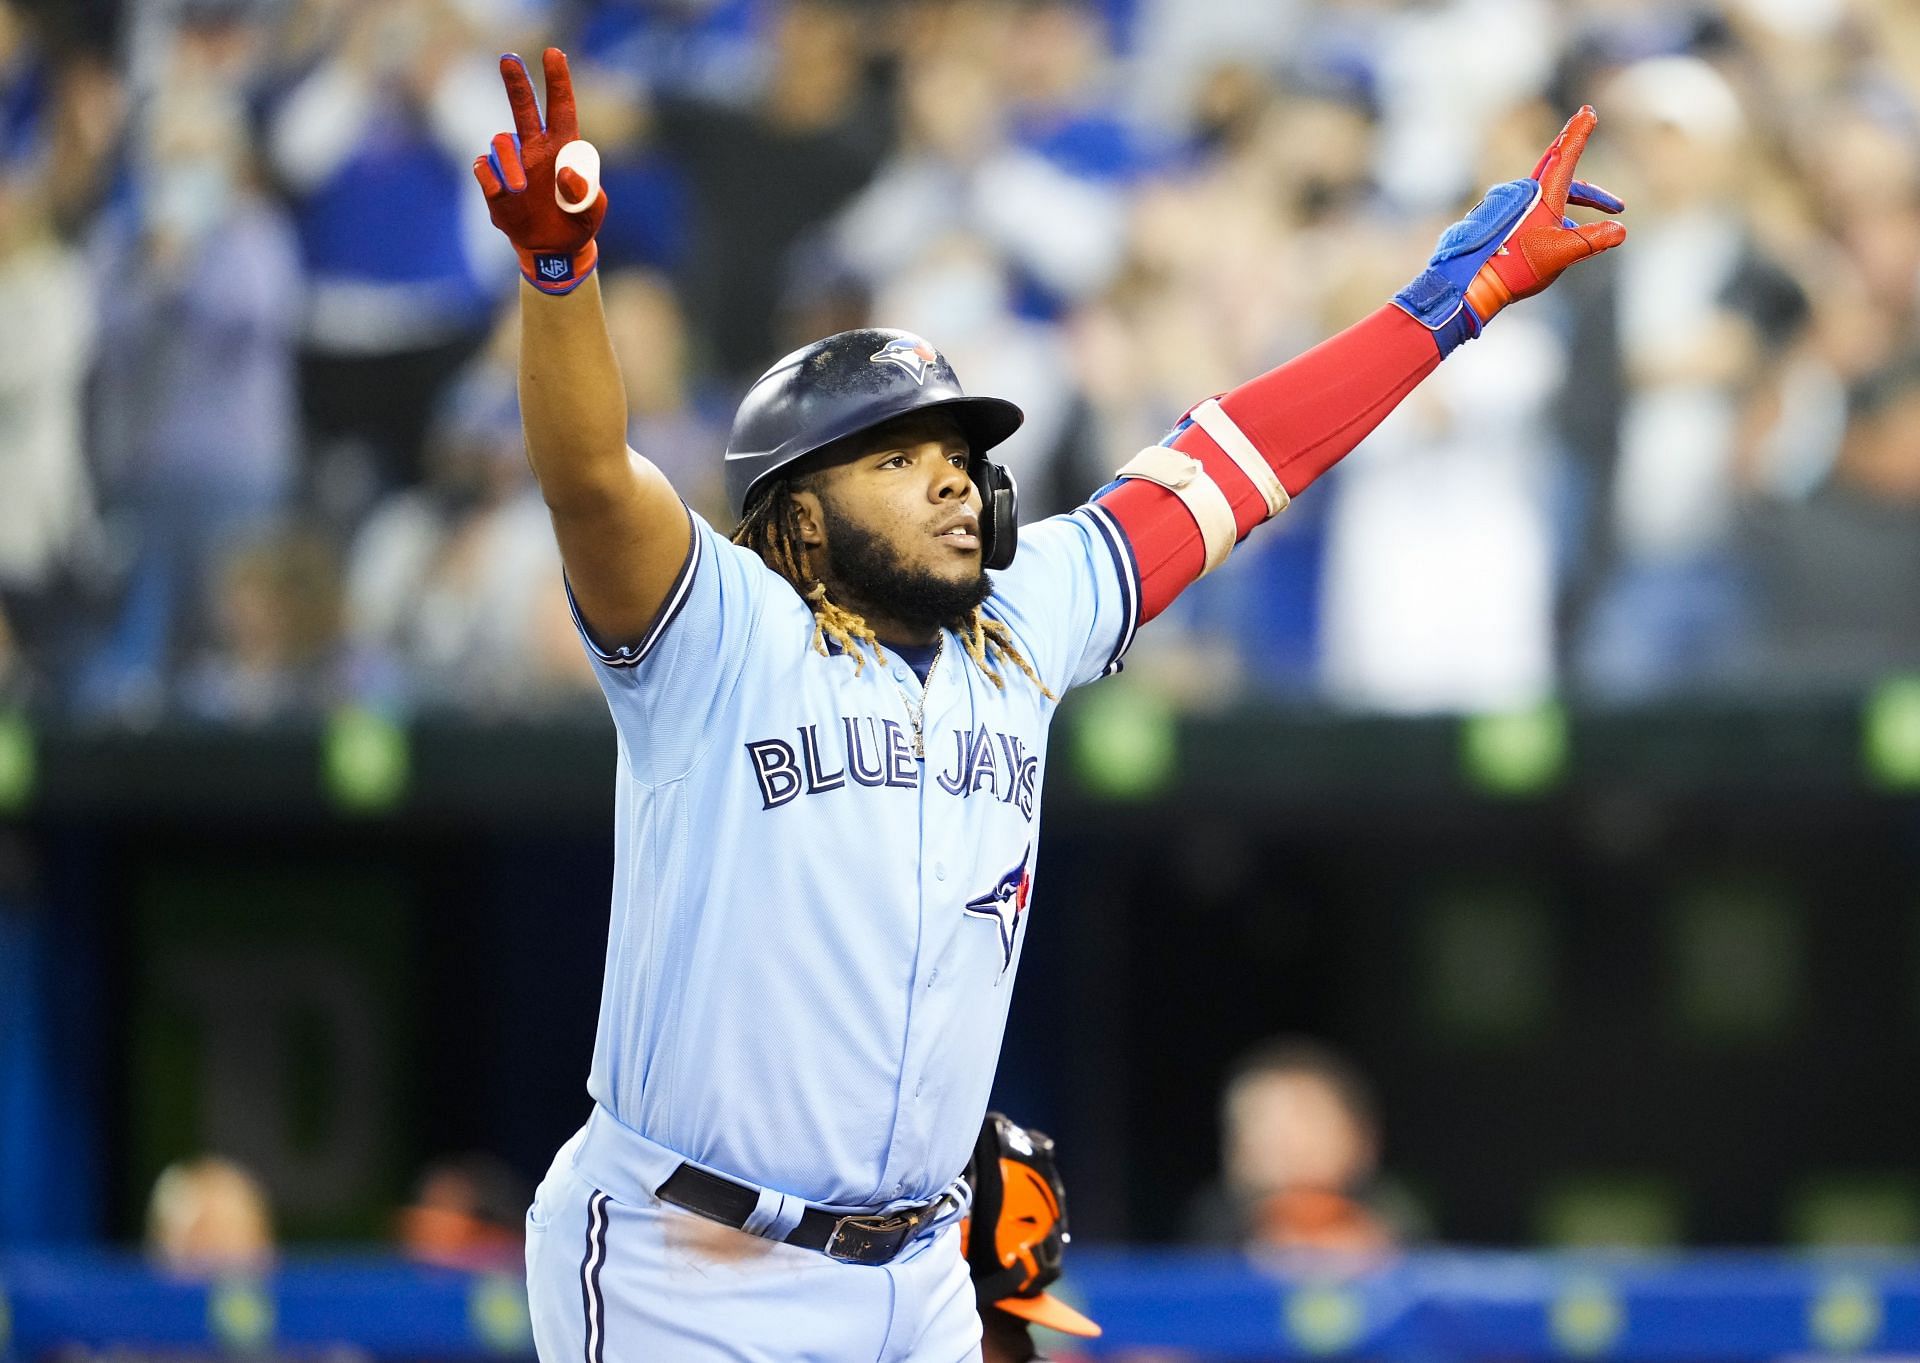 Vladimir Guerrero Jr. becomes first Blue Jay to win All-Star Game MVP award